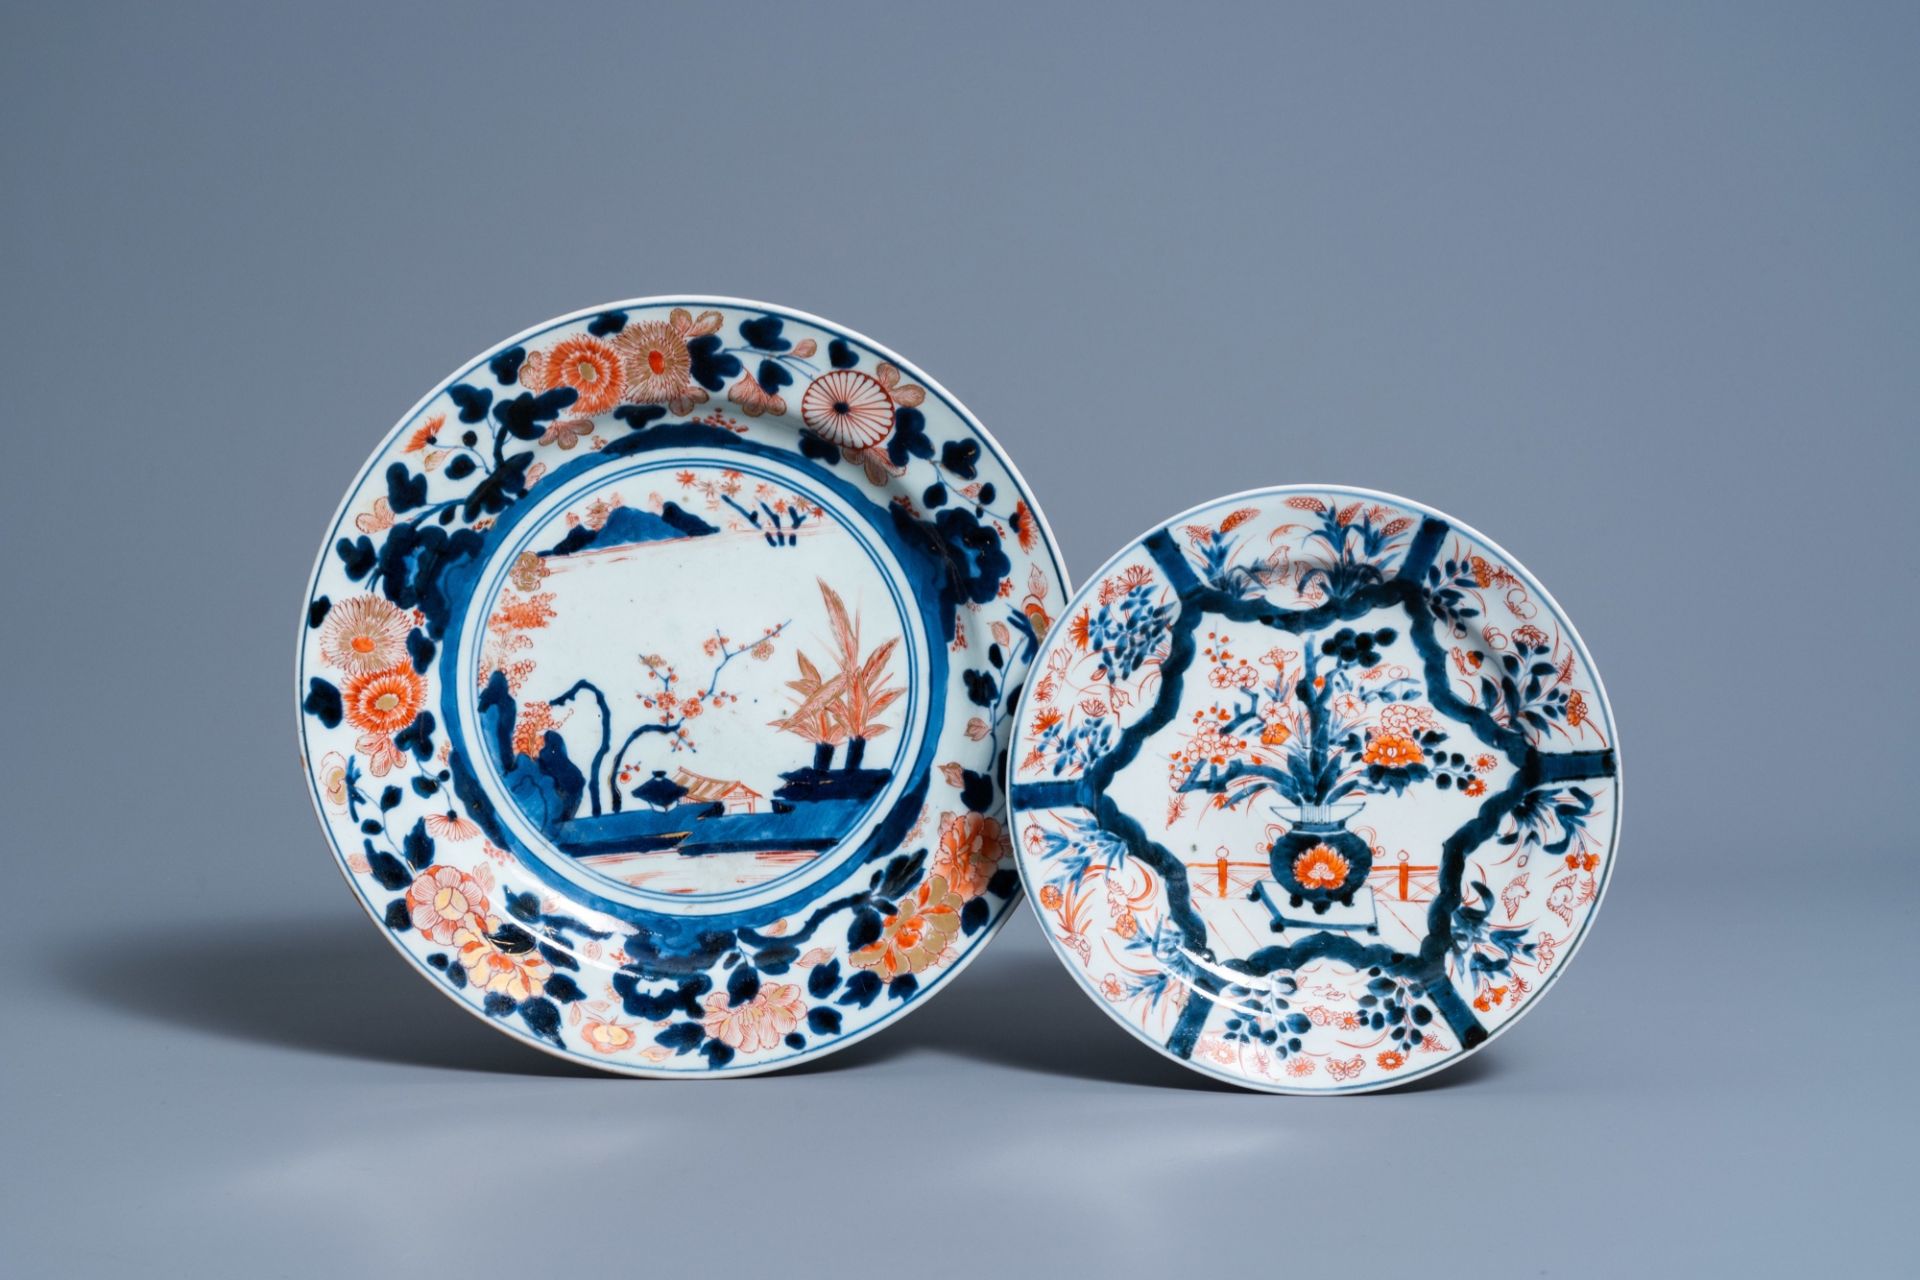 A Japanese Imari charger with a landscape and a plate with floral design, Edo, 18th C.